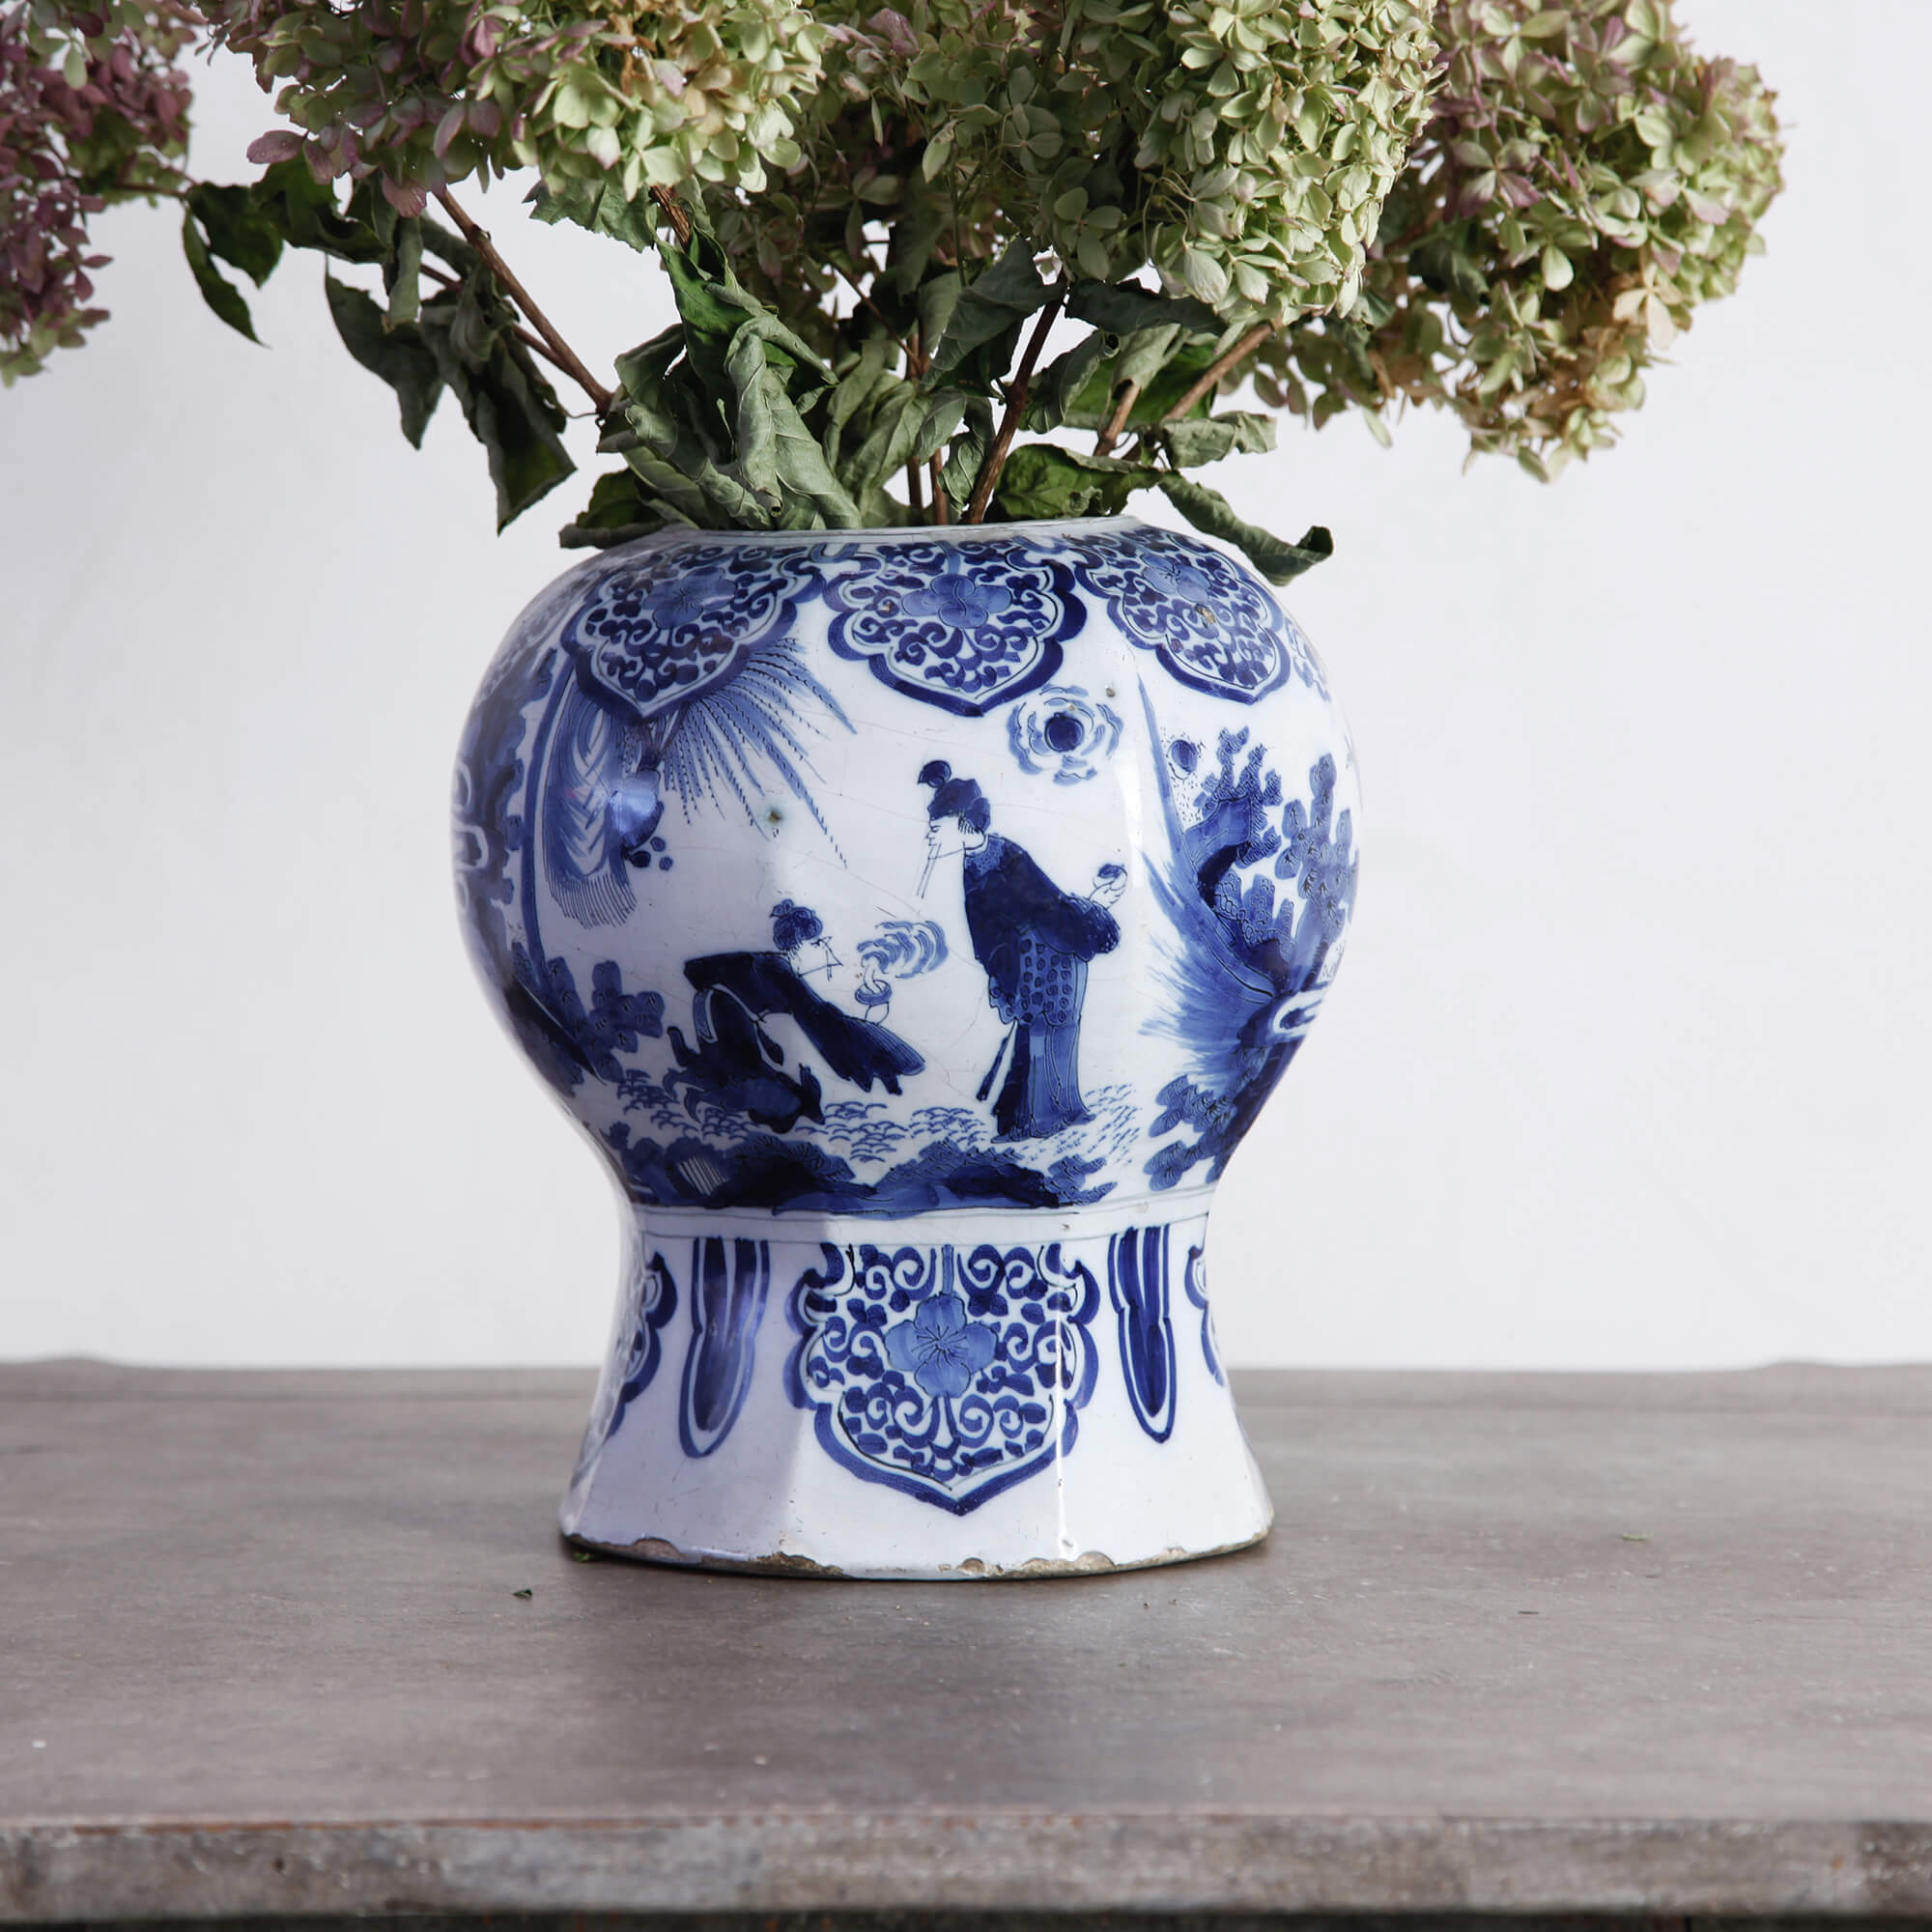 18th century Delft Blue and White Chinoiserie Baluster Vase